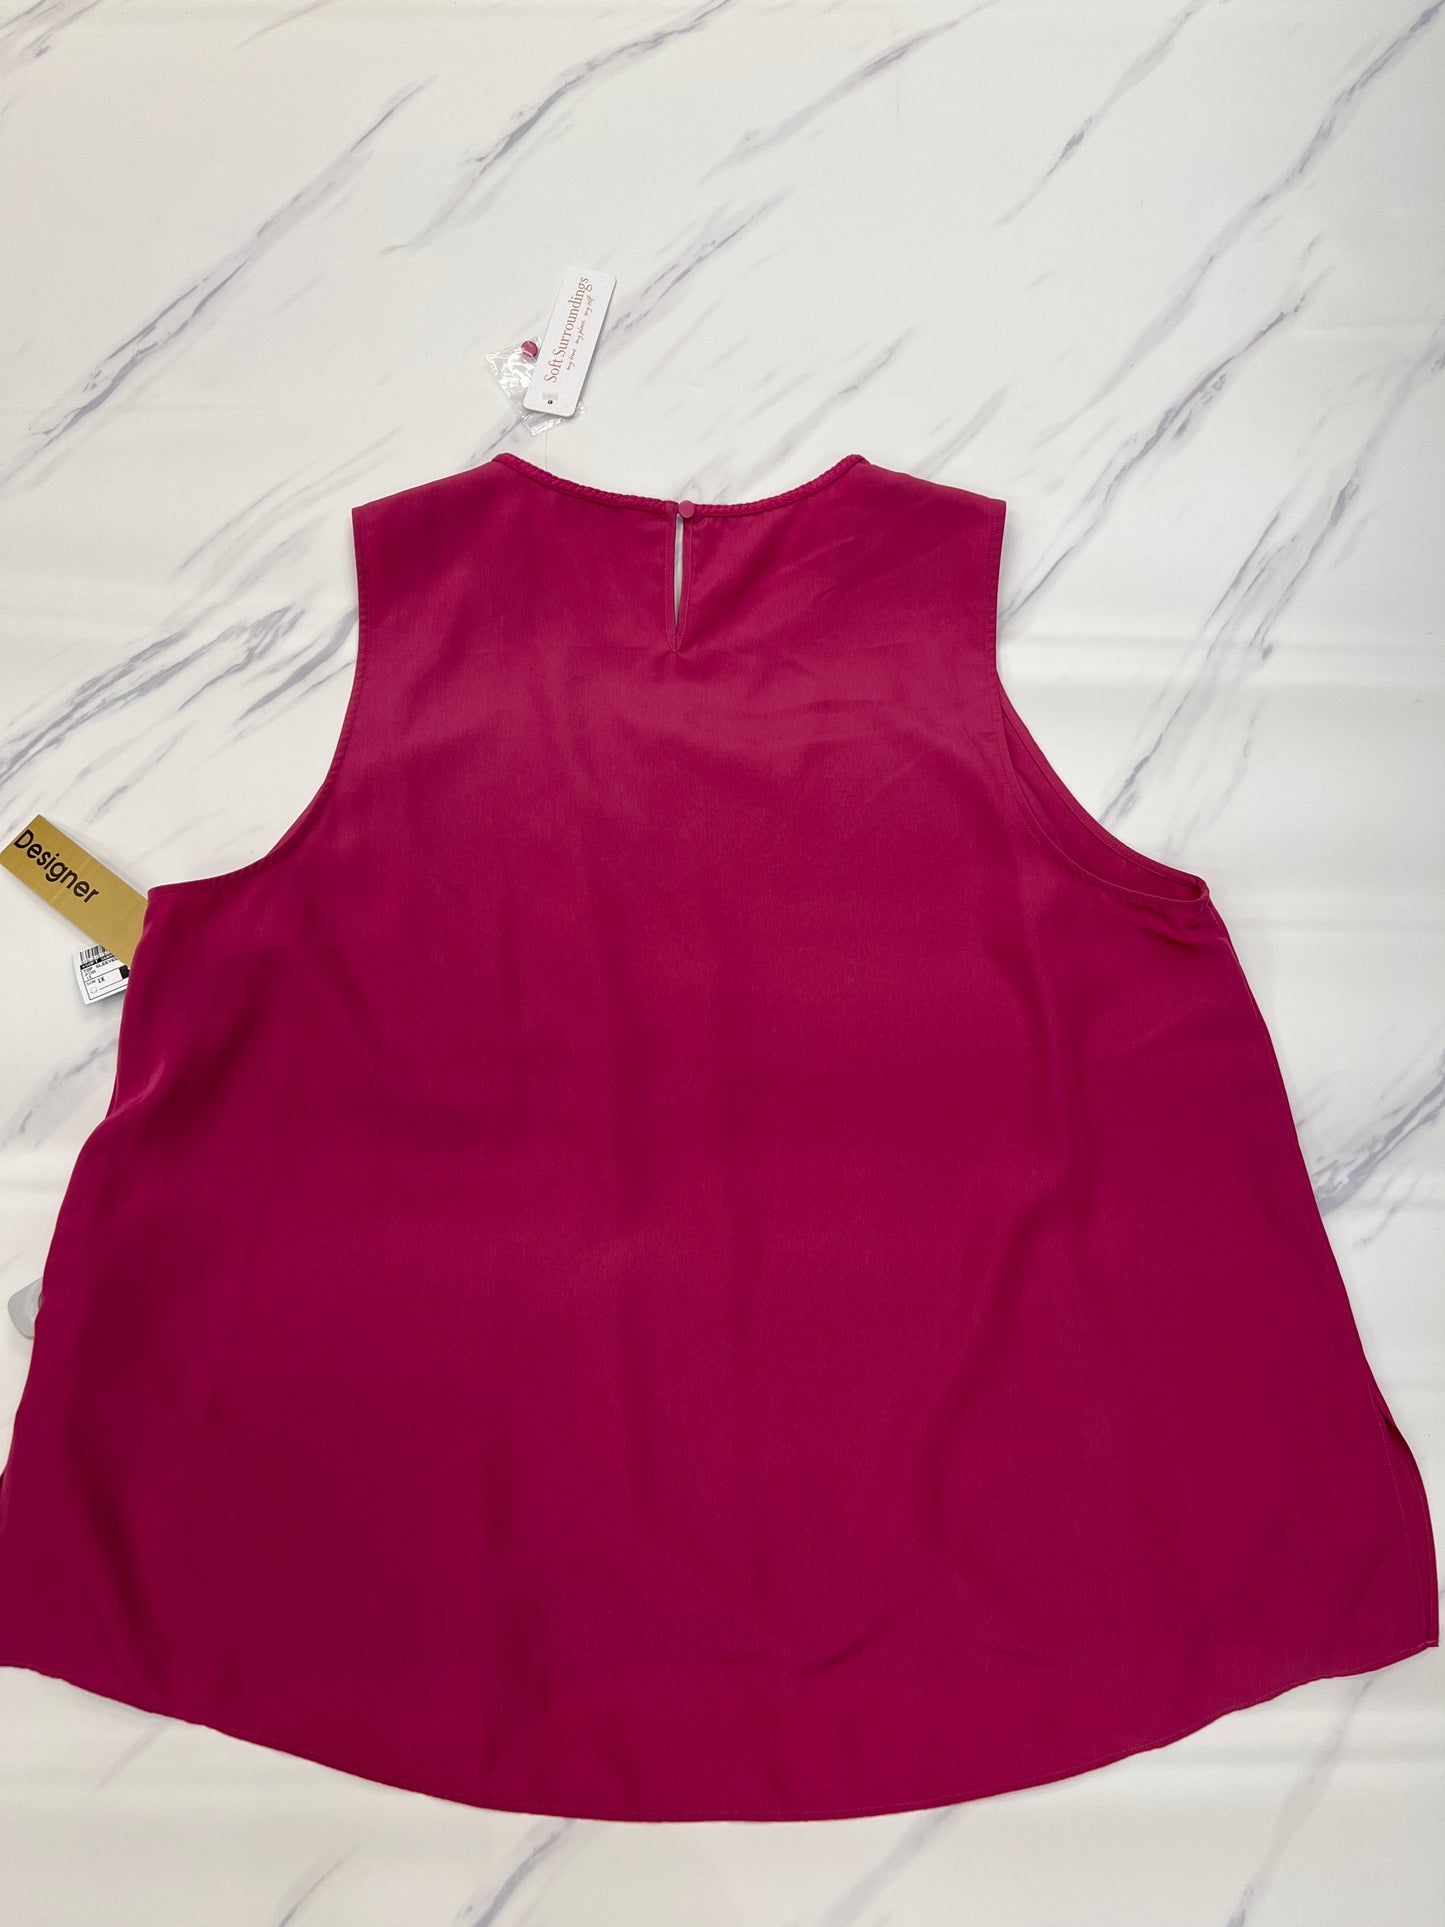 Top Sleeveless By Soft Surroundings  Size: 1x